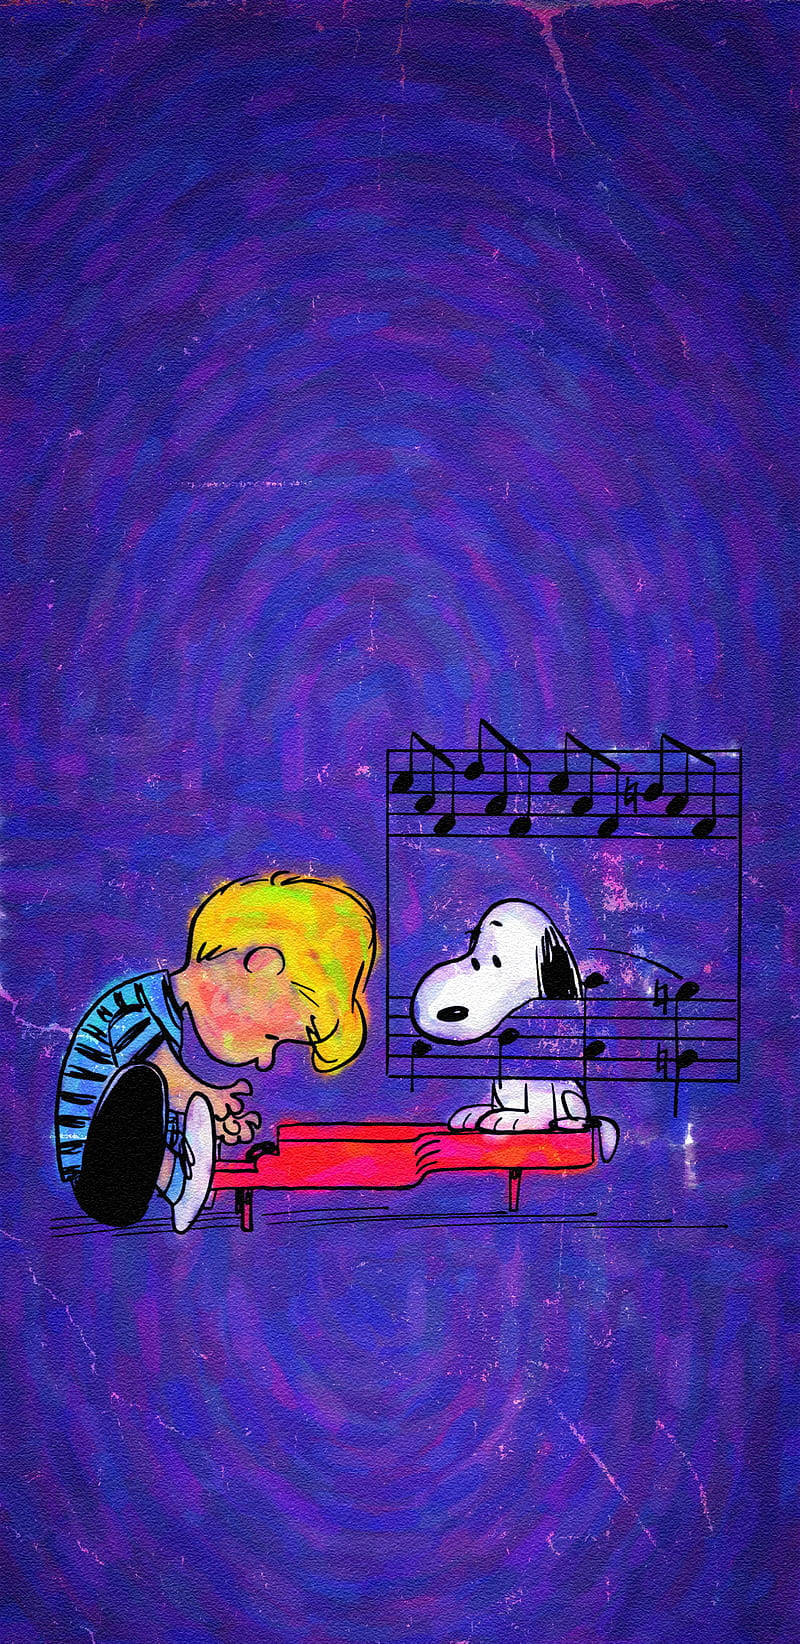 Peanuts Schroeder And Snoopy Art Wallpaper